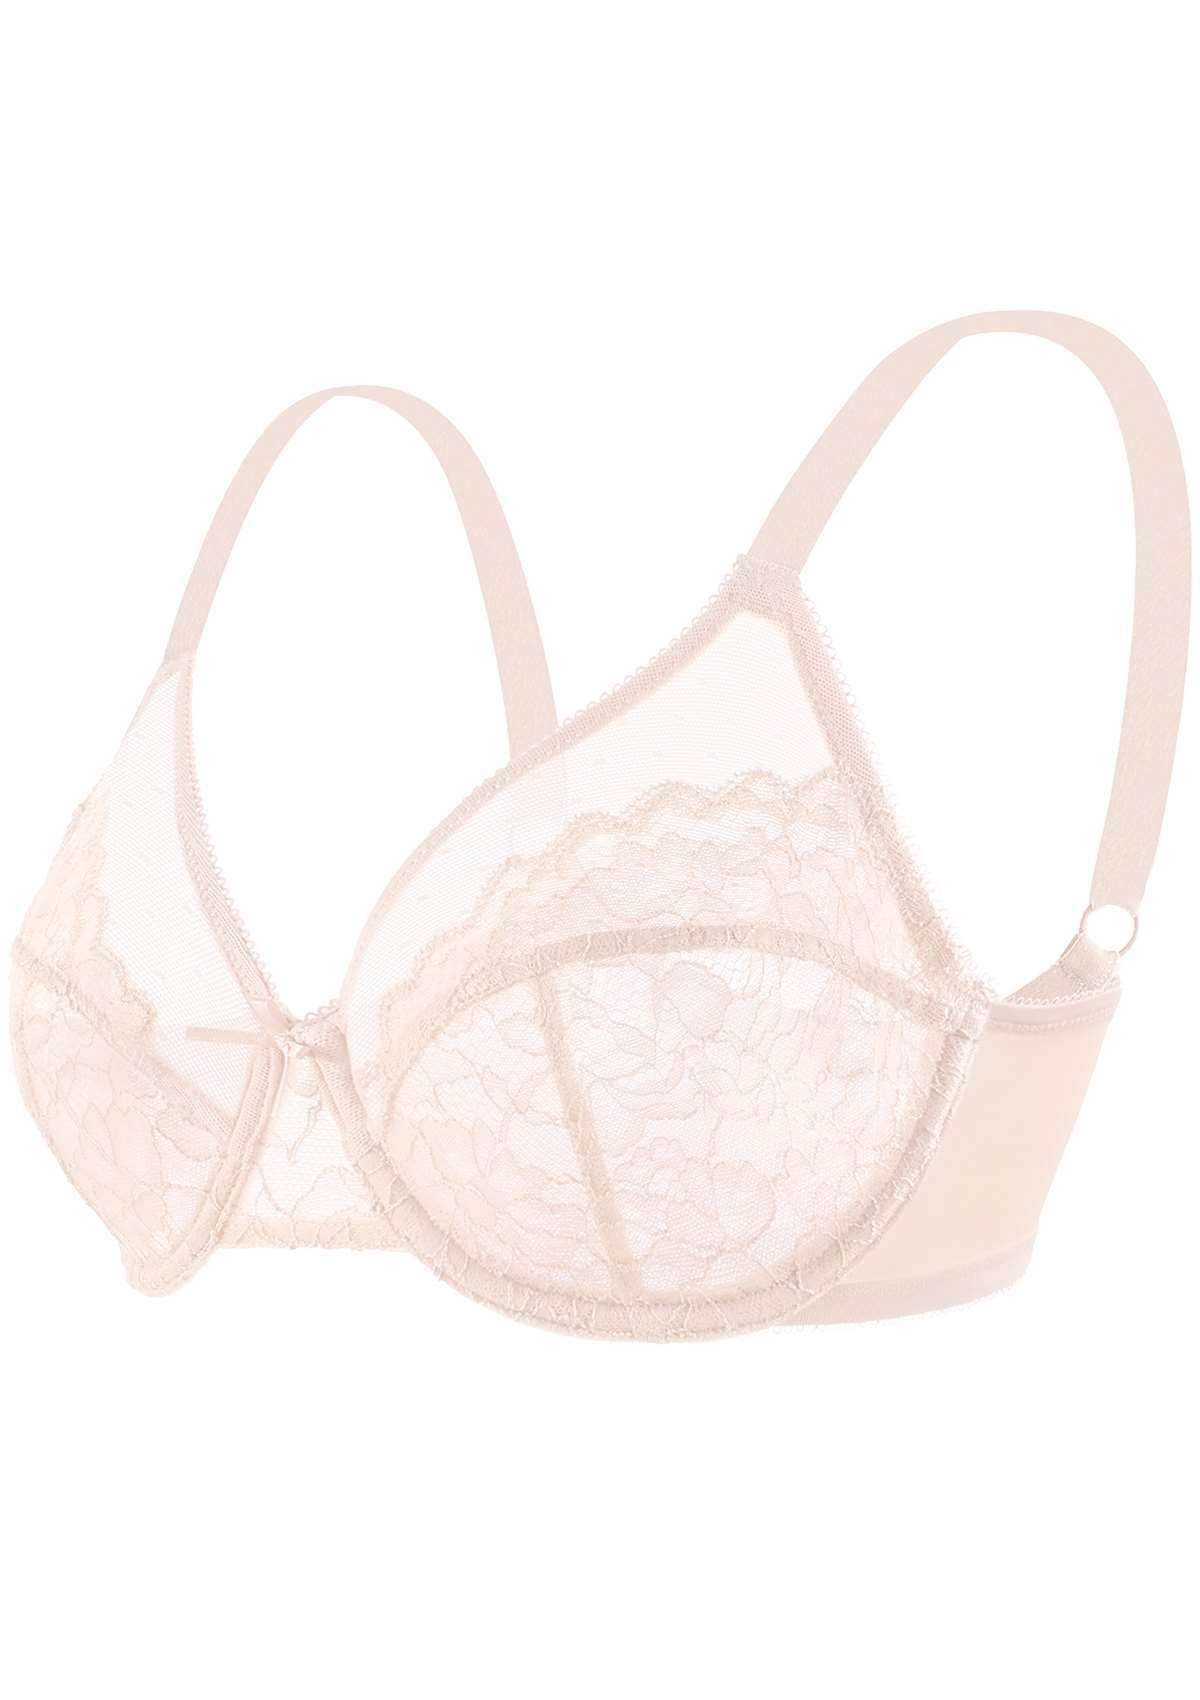 HSIA Enchante Lacy Bra: Comfy Sheer Lace Bra With Lift - Dusty Peach / 38 / H